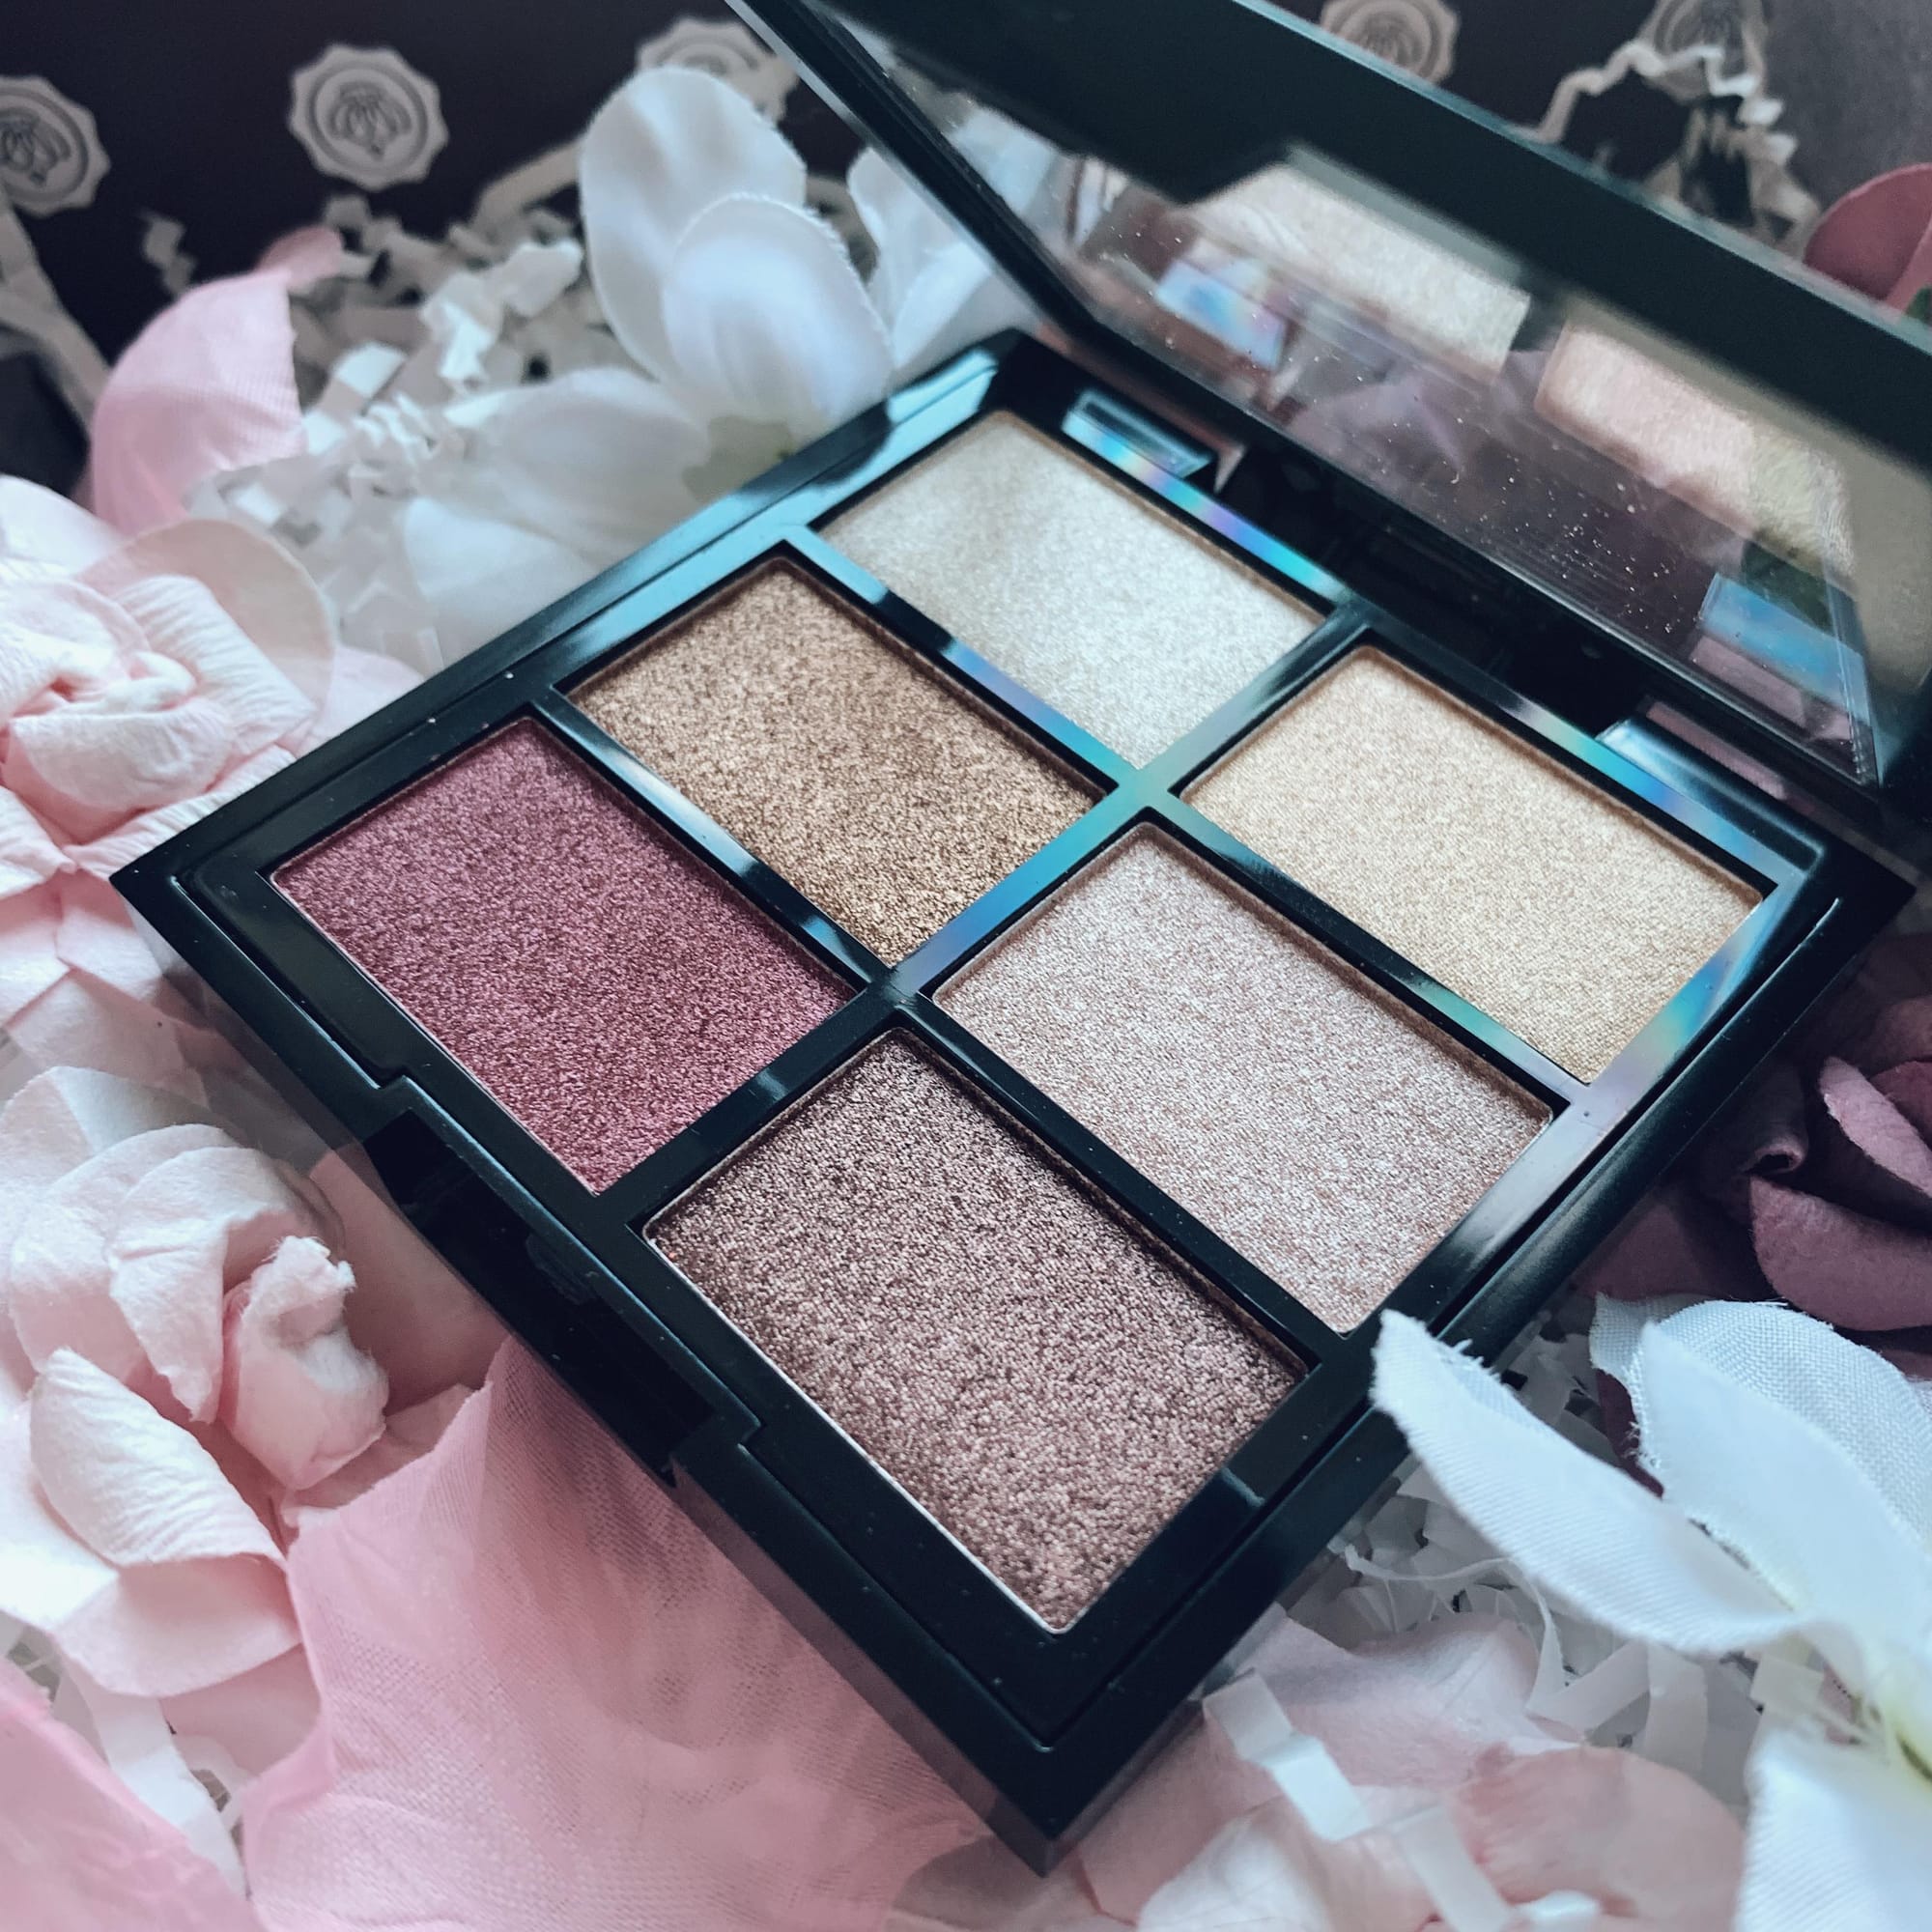 MUA Makeup Academy Pro 6 Shade Eyeshadow Palette - Only For You - Limited Edition Mother's Day Glossybox 2020 Review - Miss Boux